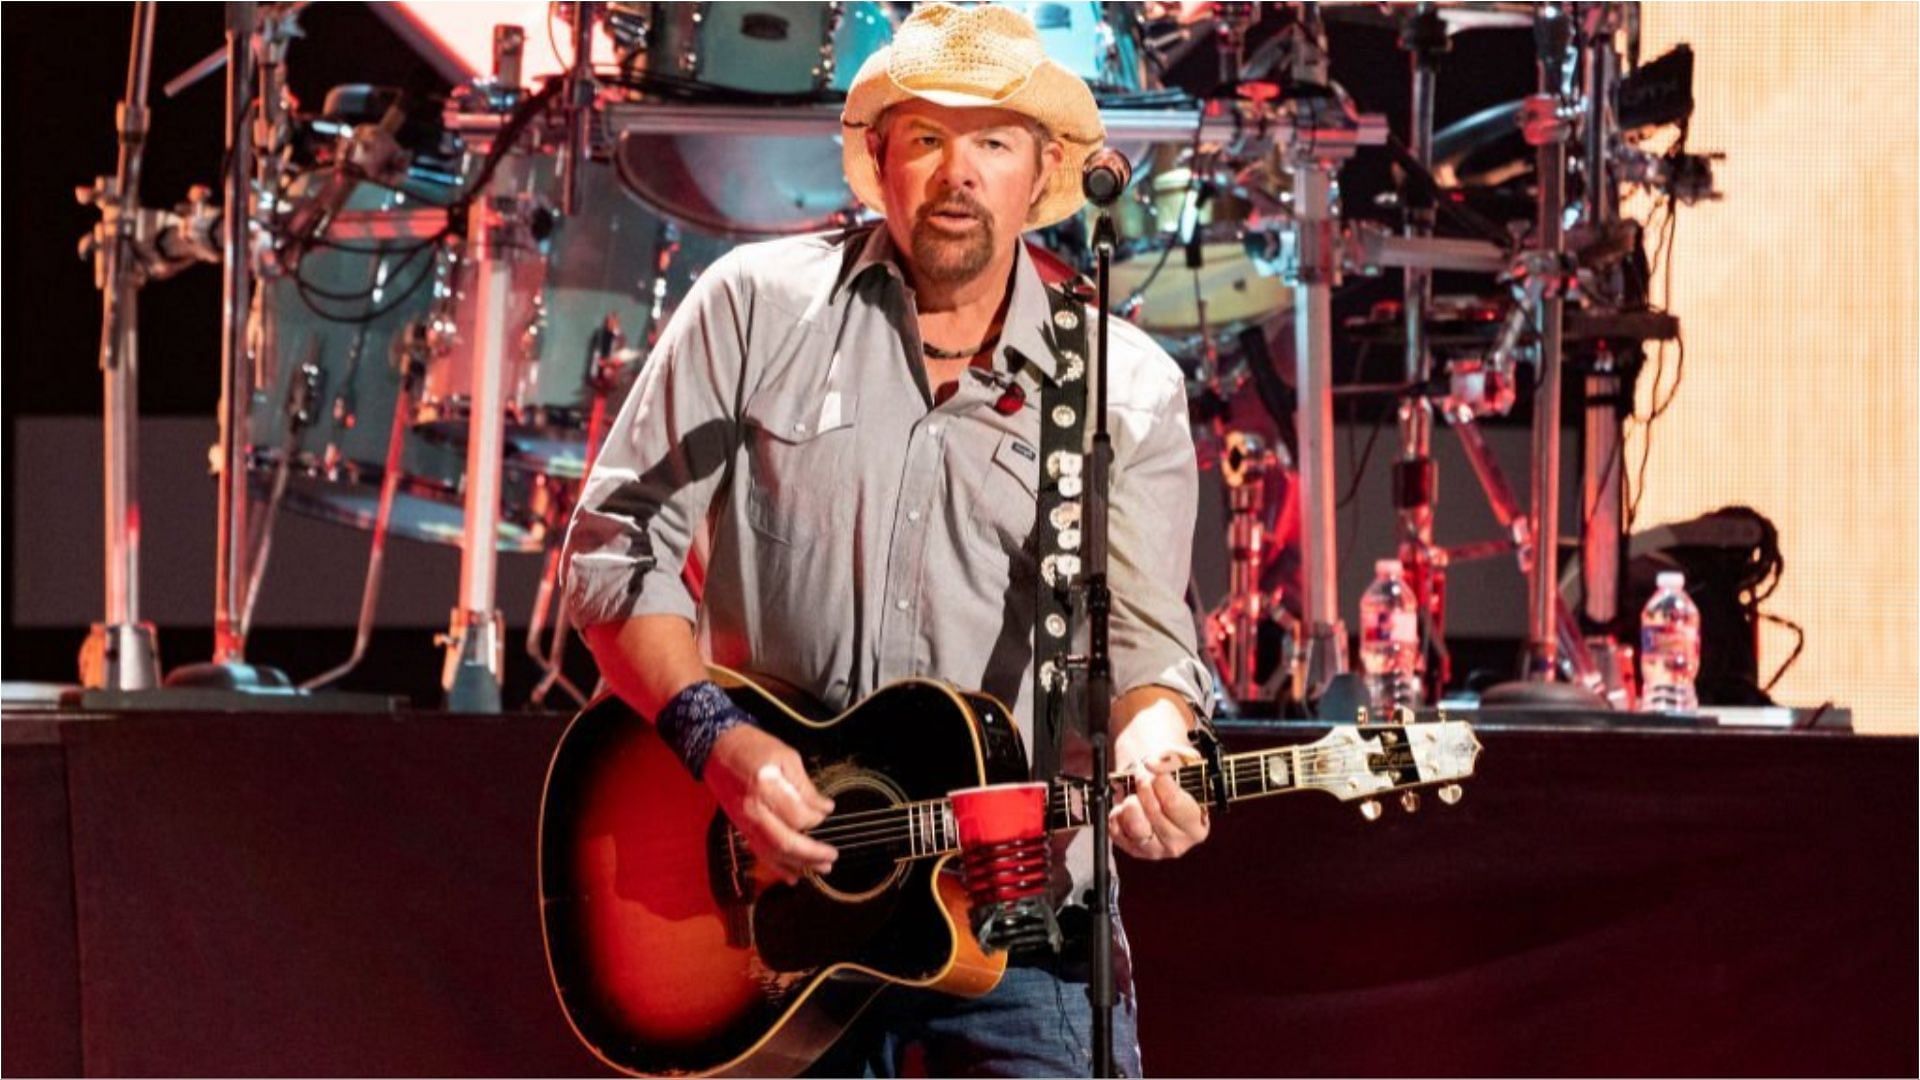 Toby Keith seemed to be weak in a picture he posted on Instagram (Image via Erika Goldring/Getty Images)